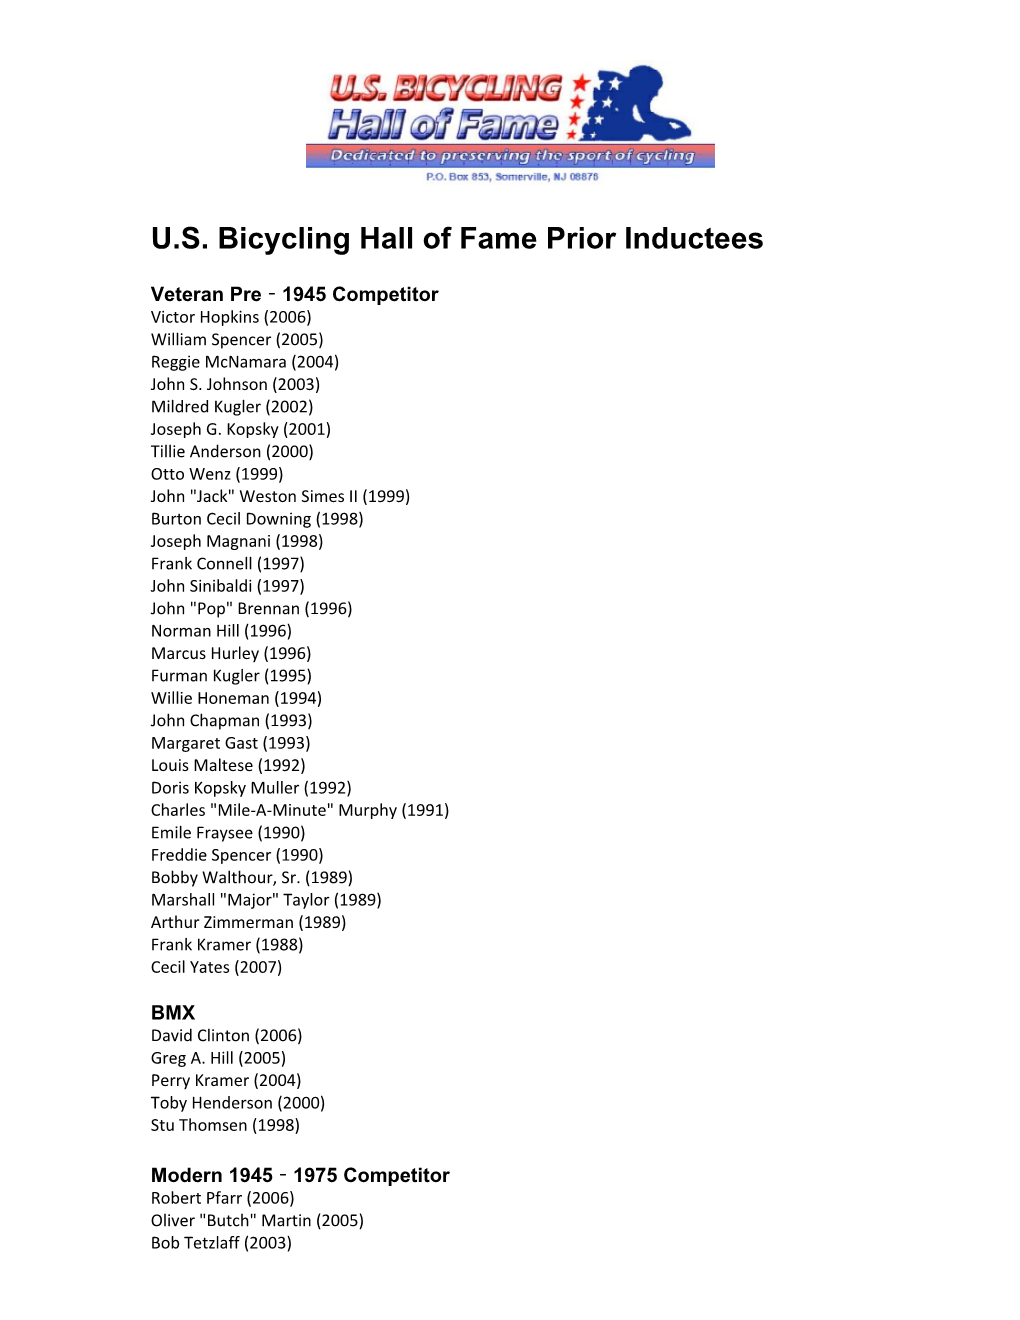 U.S. Bicycling Hall of Fame Prior Inductees